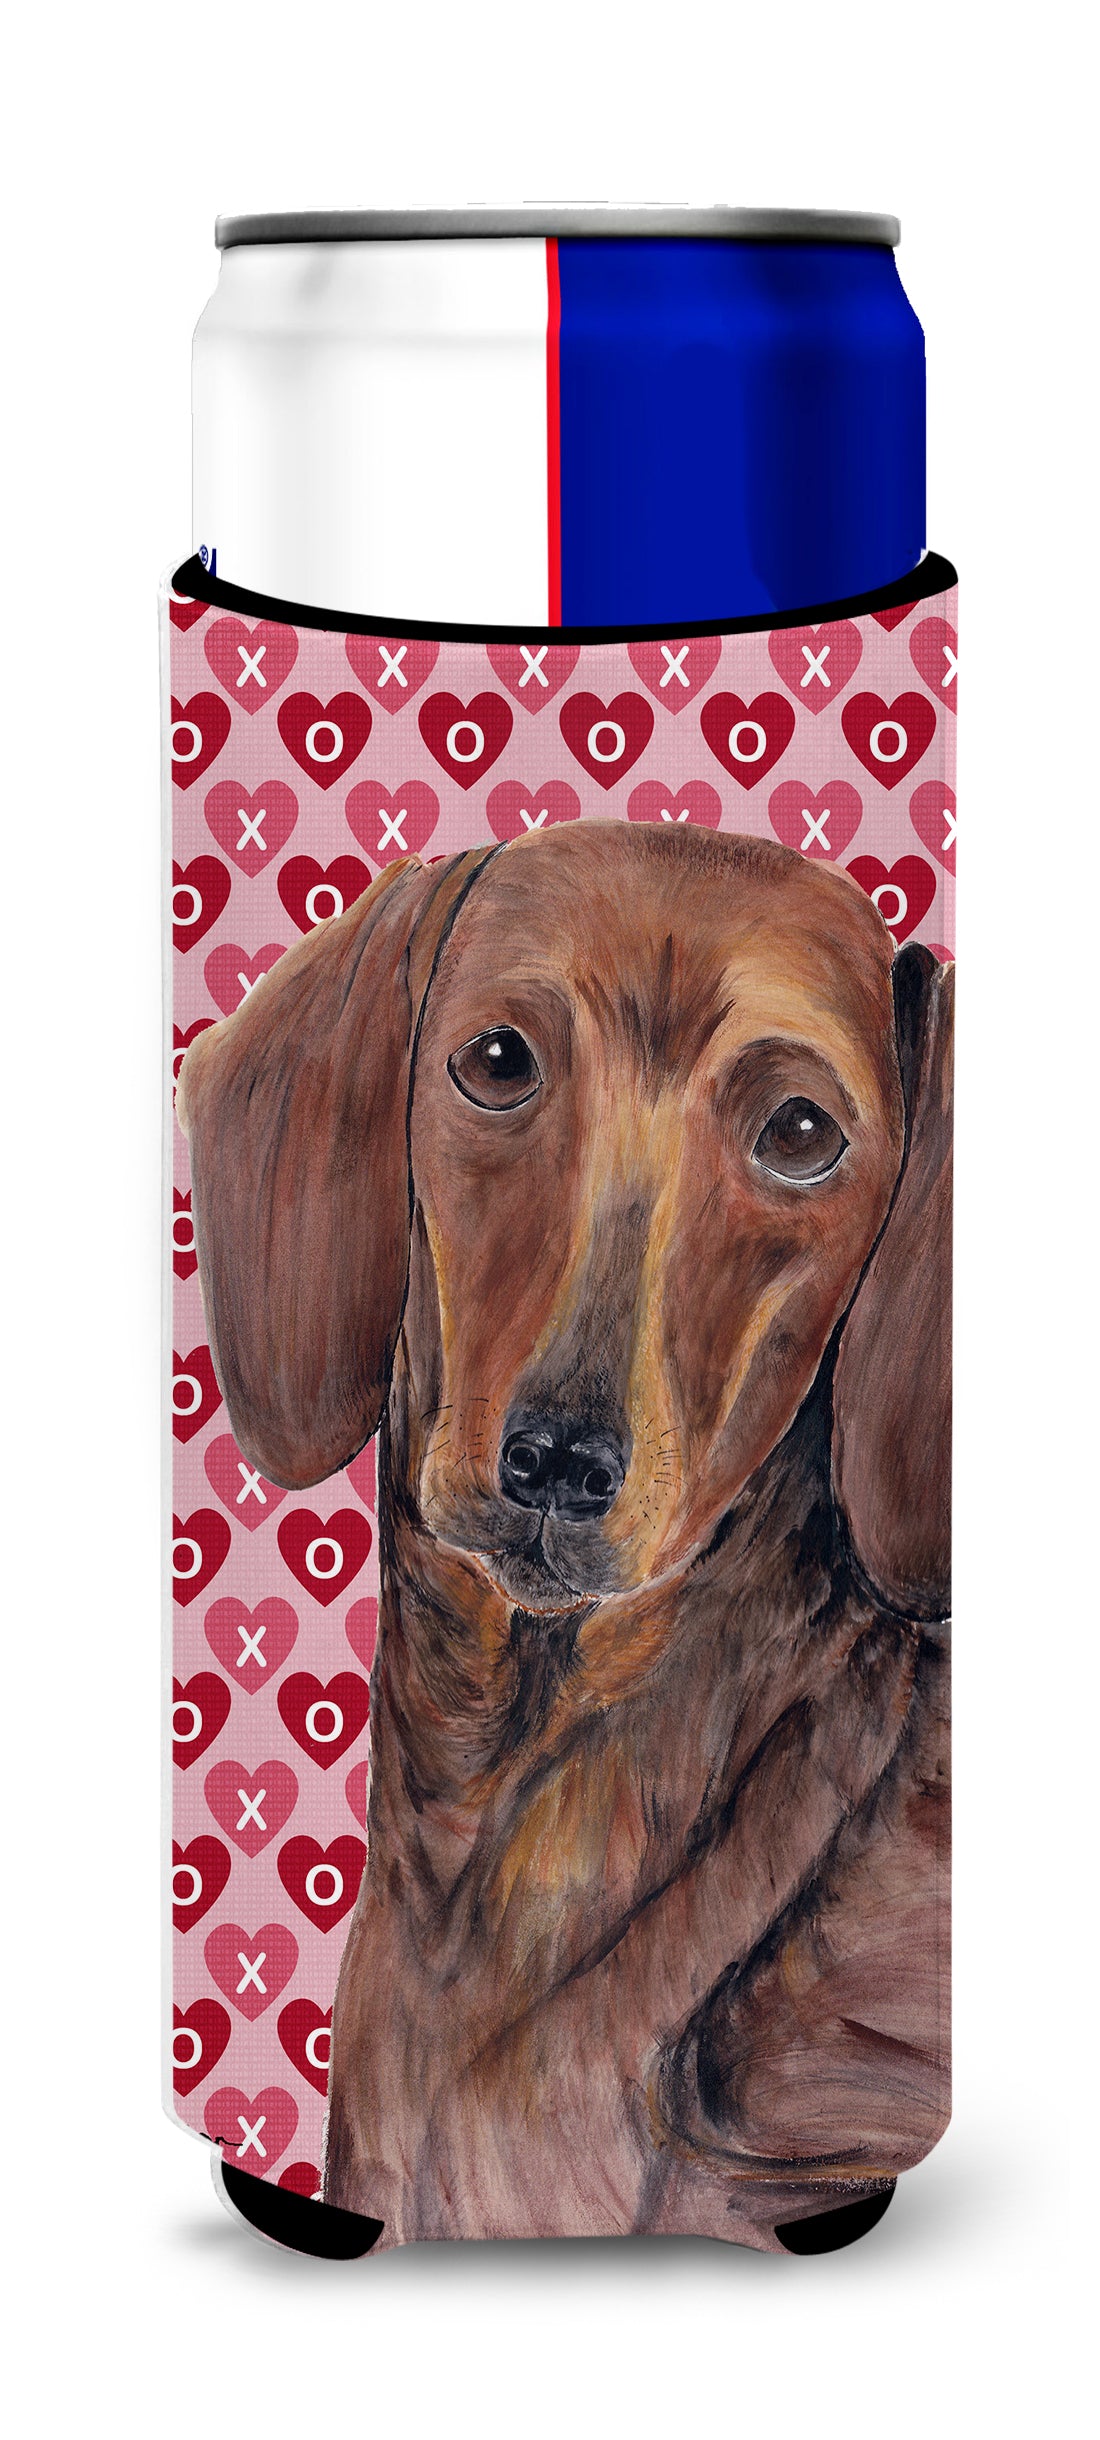 Dachshund Hearts Love and Valentine's Day Portrait Ultra Beverage Insulators for slim cans SC9271MUK.